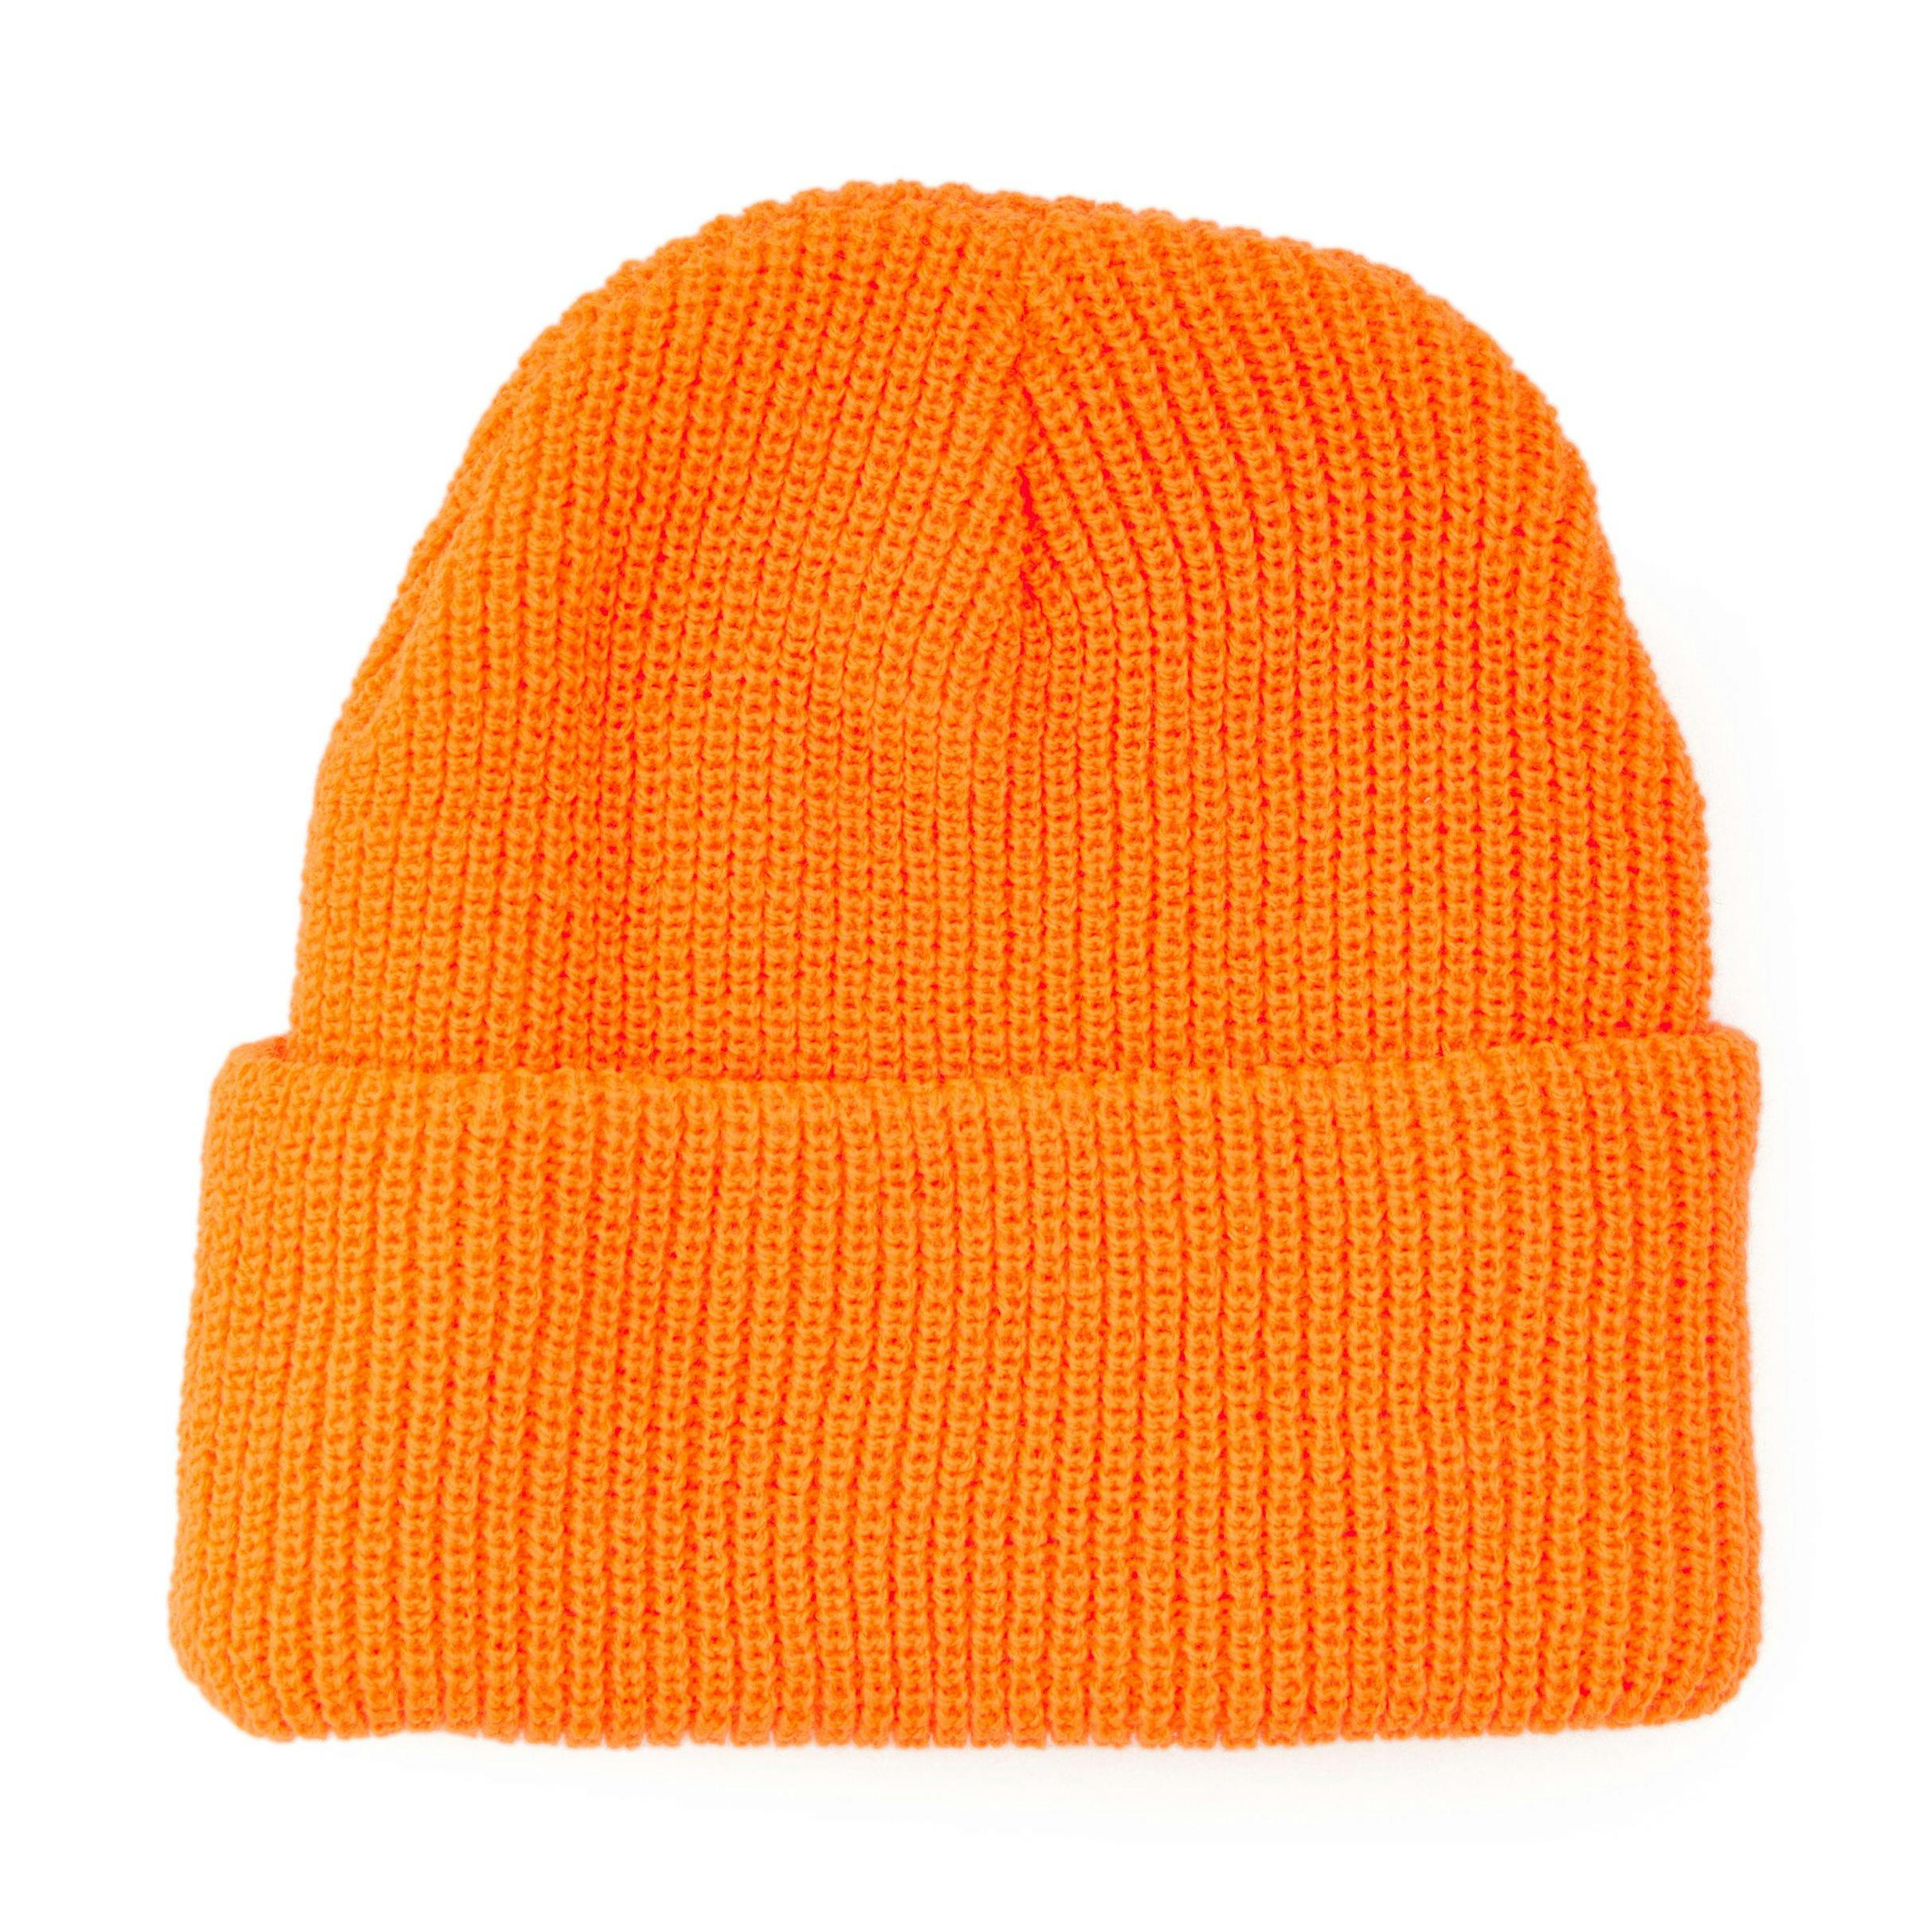 COLUMBIA WINTER HAT ORANGE SNOW MADE USA AMERICA OUTDOOR MADE IN USA US  WORKWEAR CAMPING CAMP HUNTING SEA FISHING